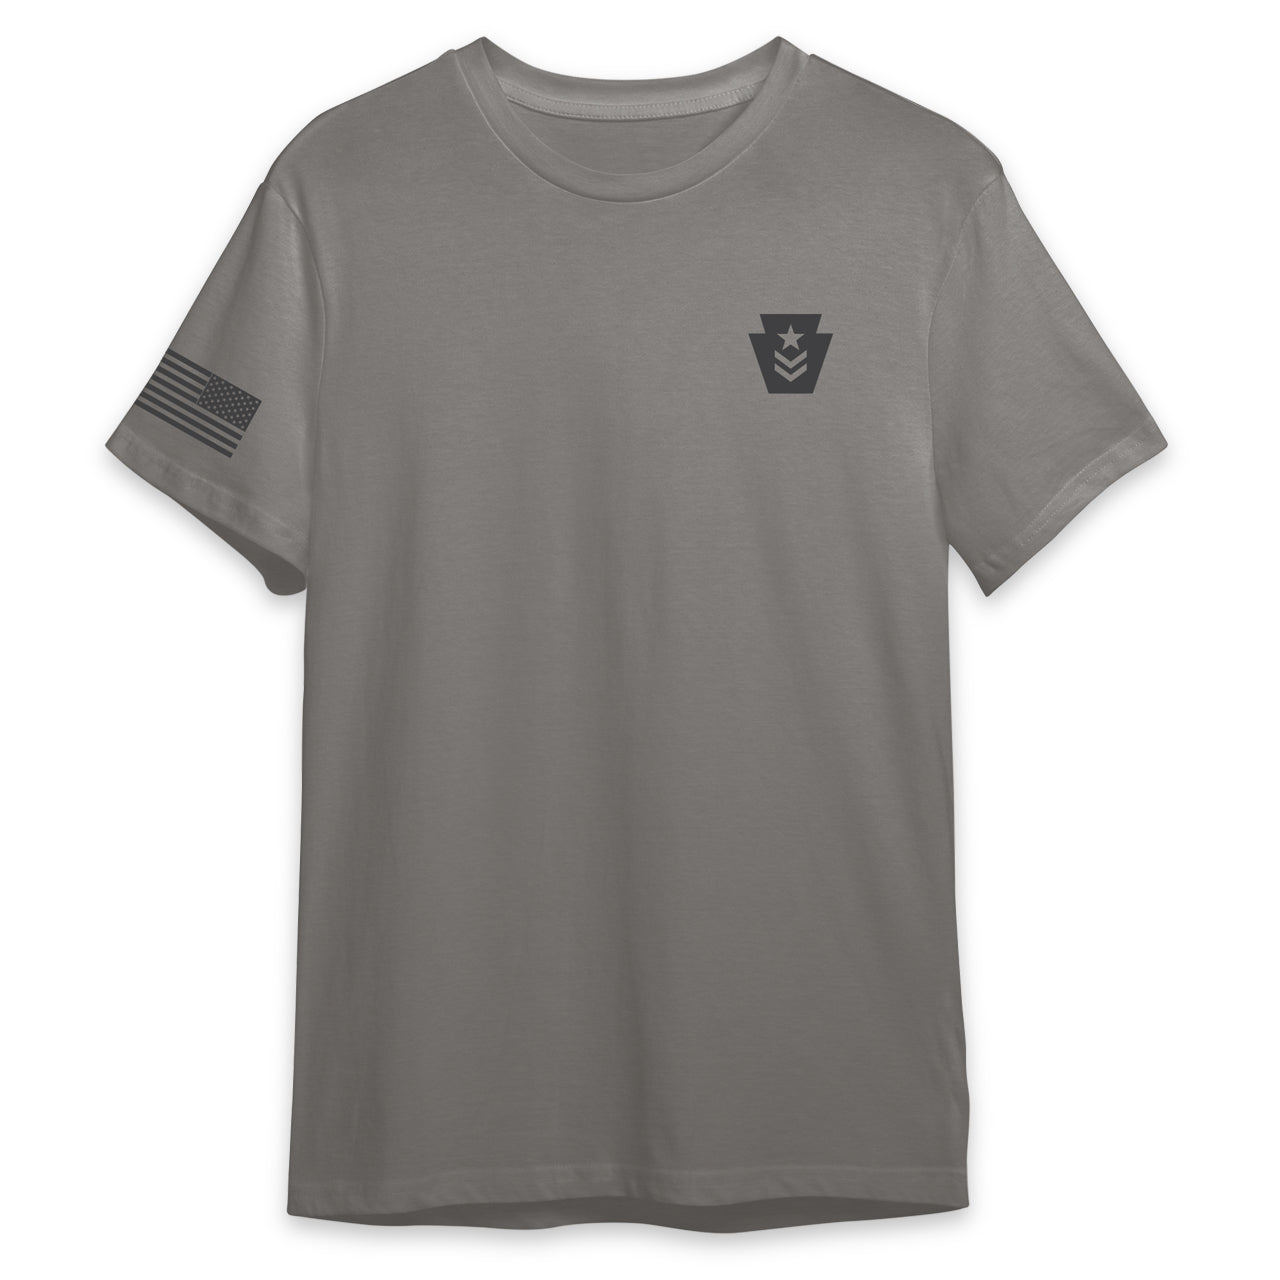 Under Armour Training seamless t-shirt in stone